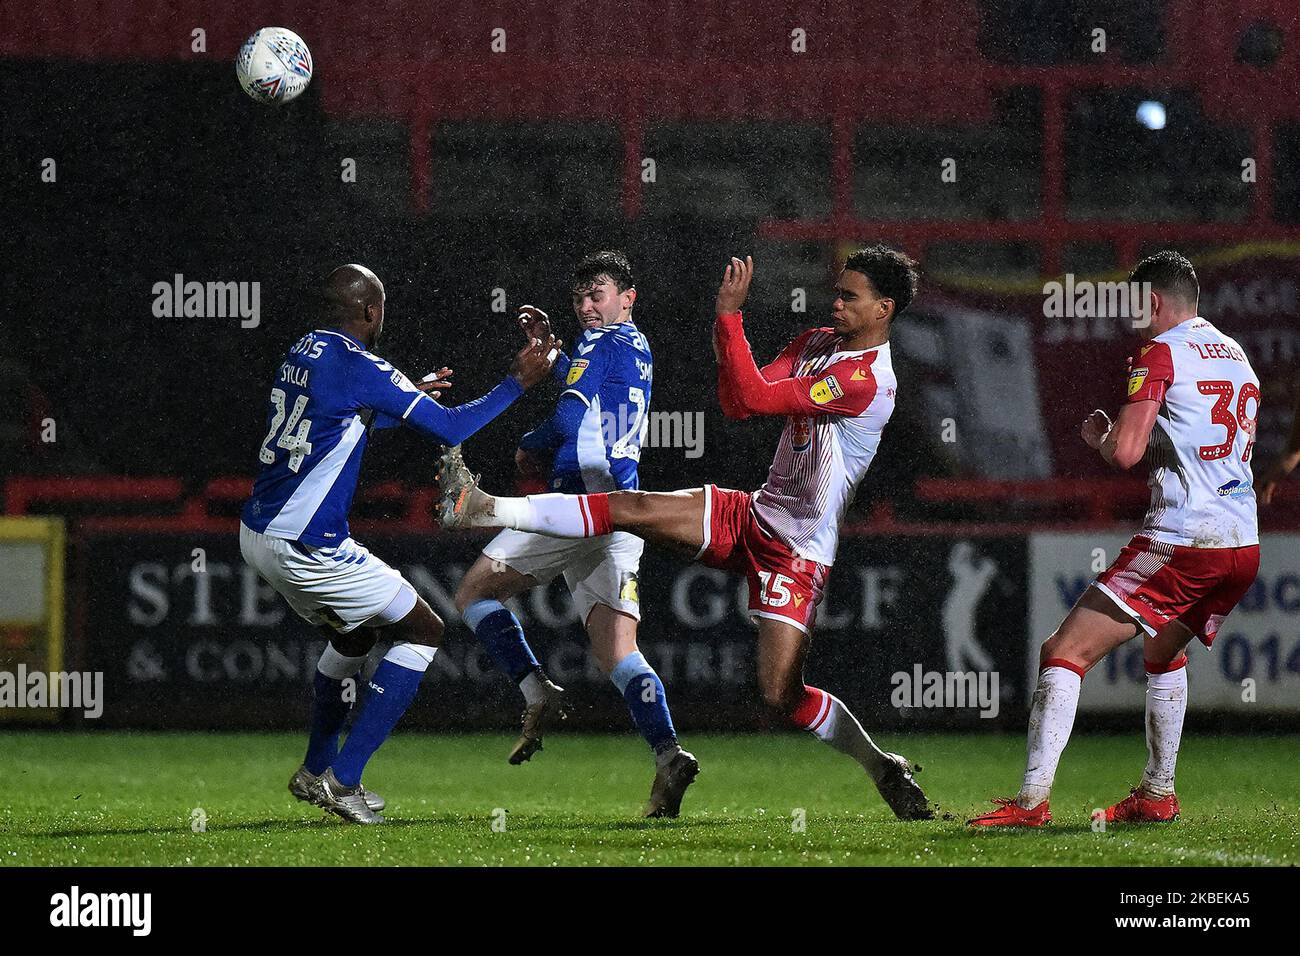 Mohamed Sylla of Oldham Athletic and Jonny Smith of Oldham Athletic and Terence Vancooten of Stevenage during the Sky Bet League 2 match between Stevenage and Oldham Athletic at the Lamex Stadium, Stevenage on Tuesday 14th January 2020. (Photo by Eddie Garvey/MI News/NurPhoto) Stock Photo